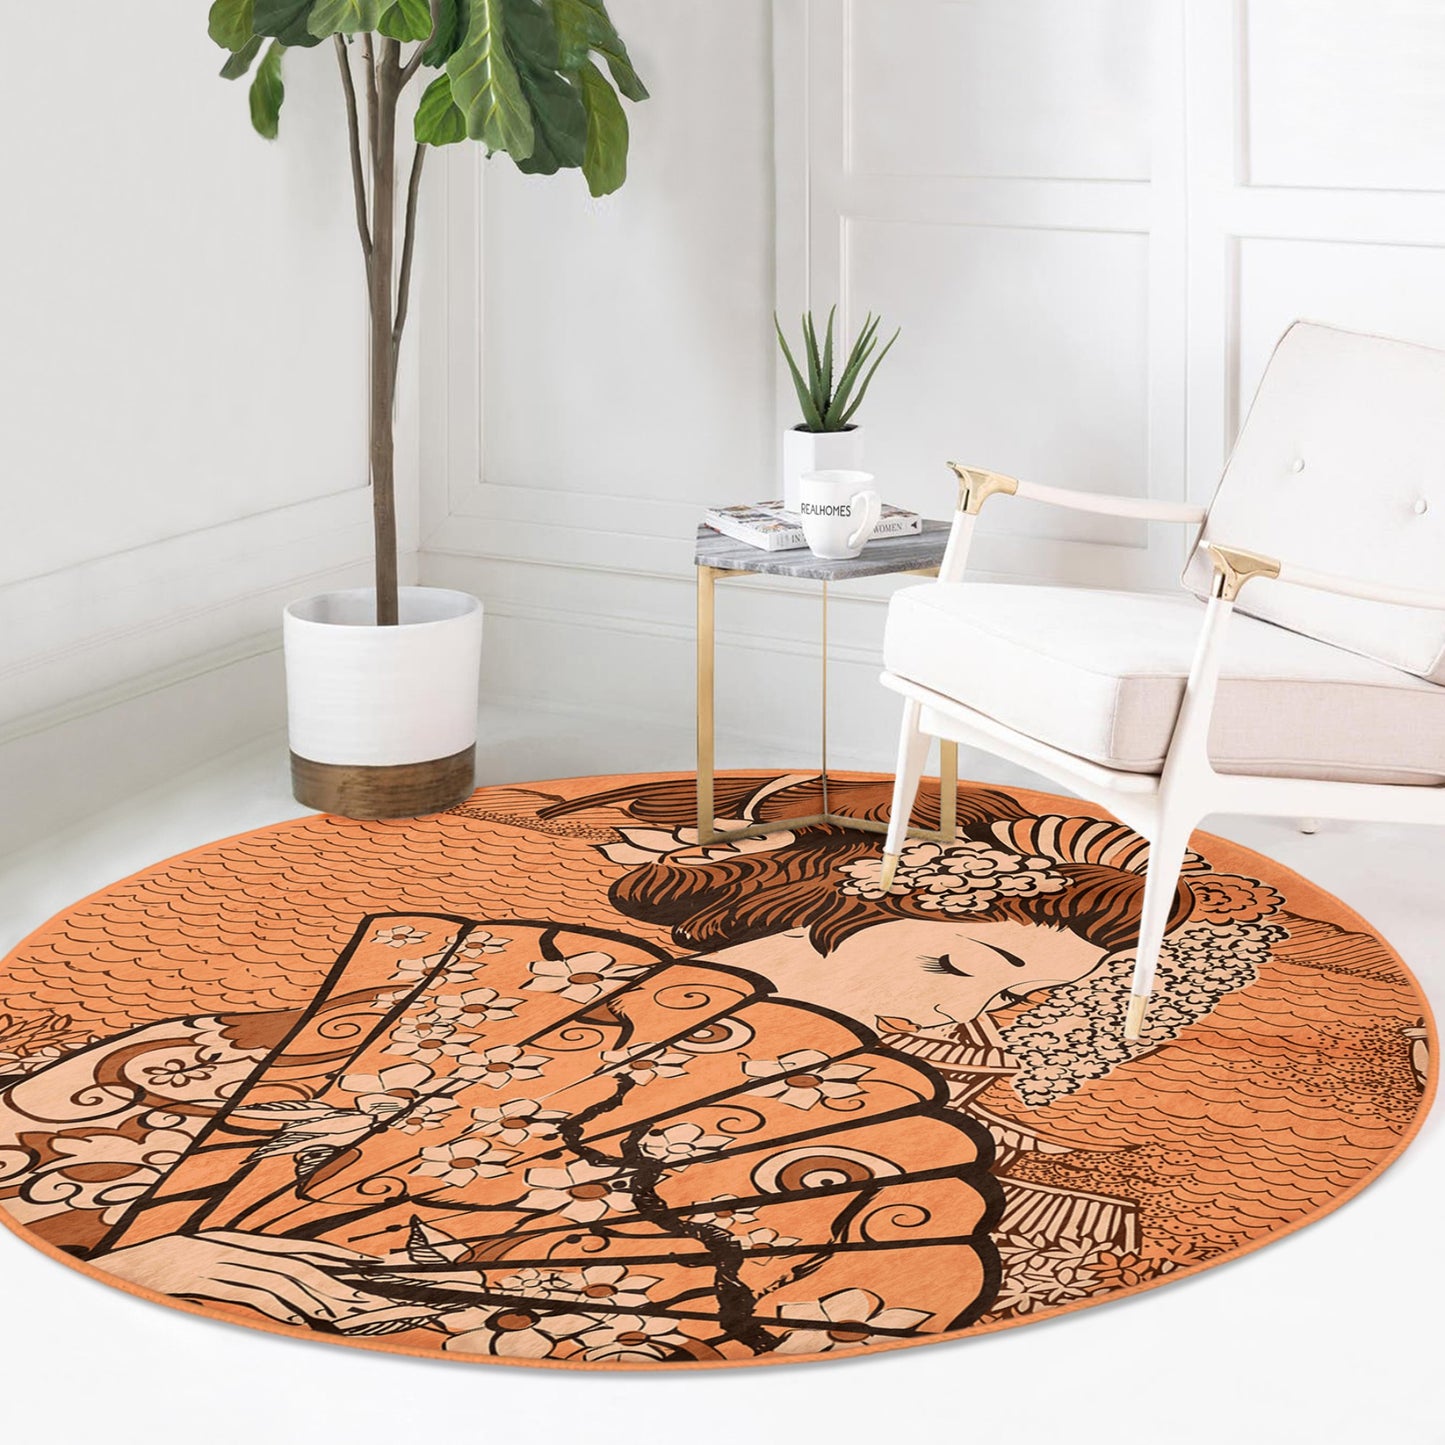 Round Patterned Floor Rug - Cultural Ambiance Accent